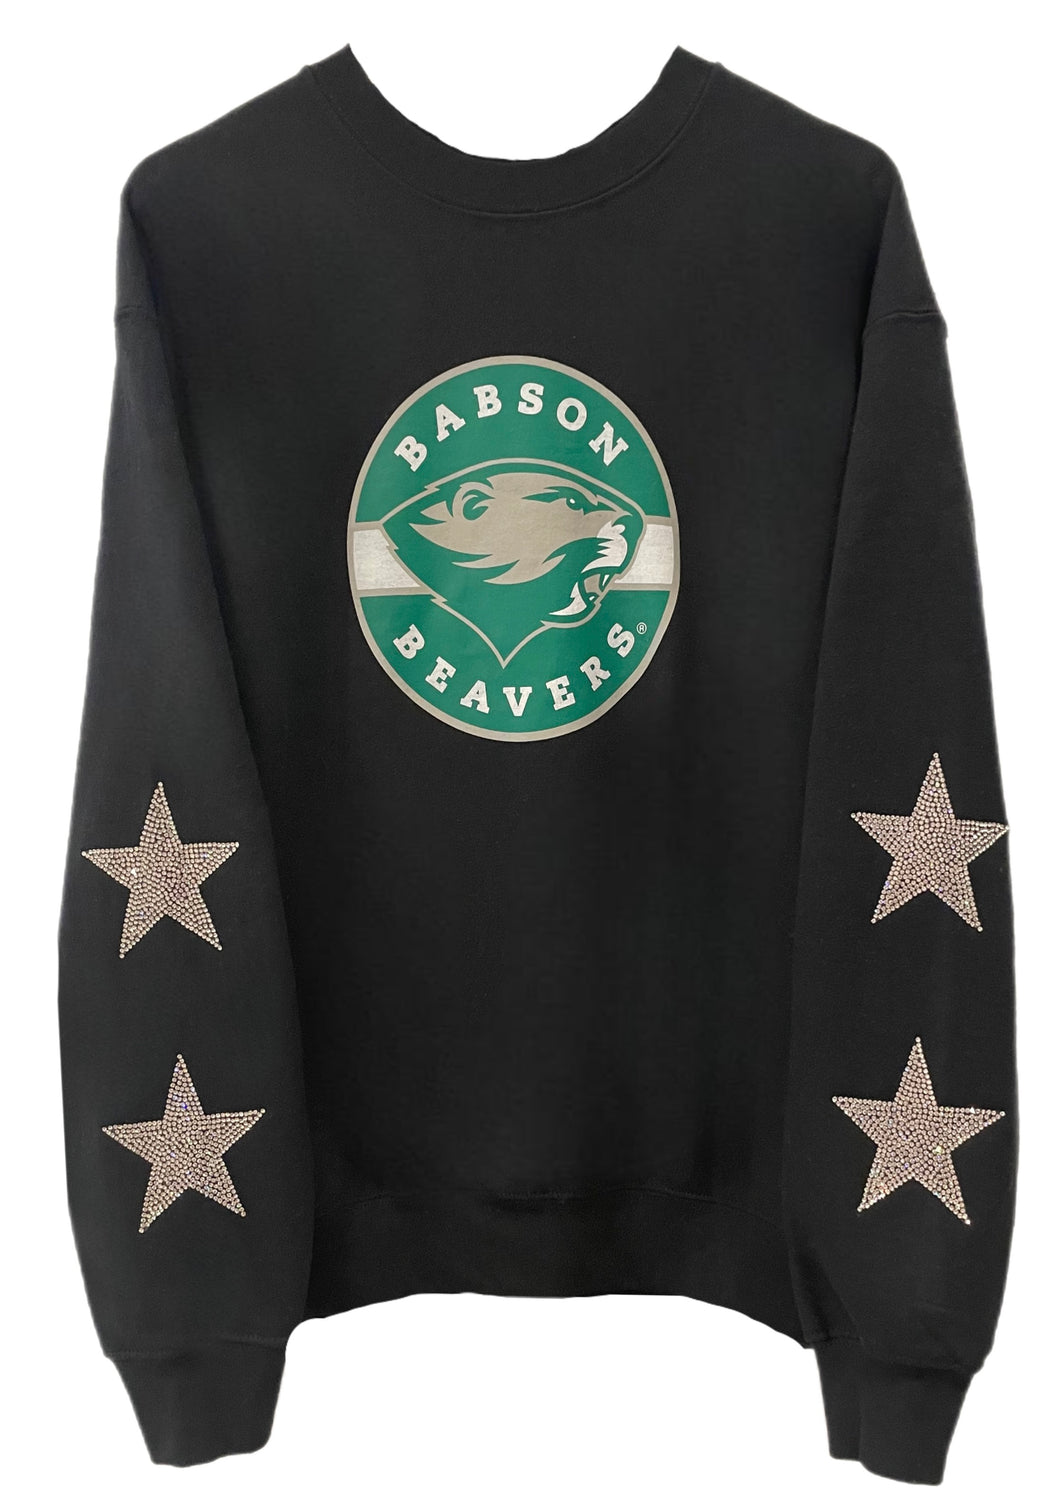 Babson College, One of a KIND Sweatshirt with Crystal Star Design.